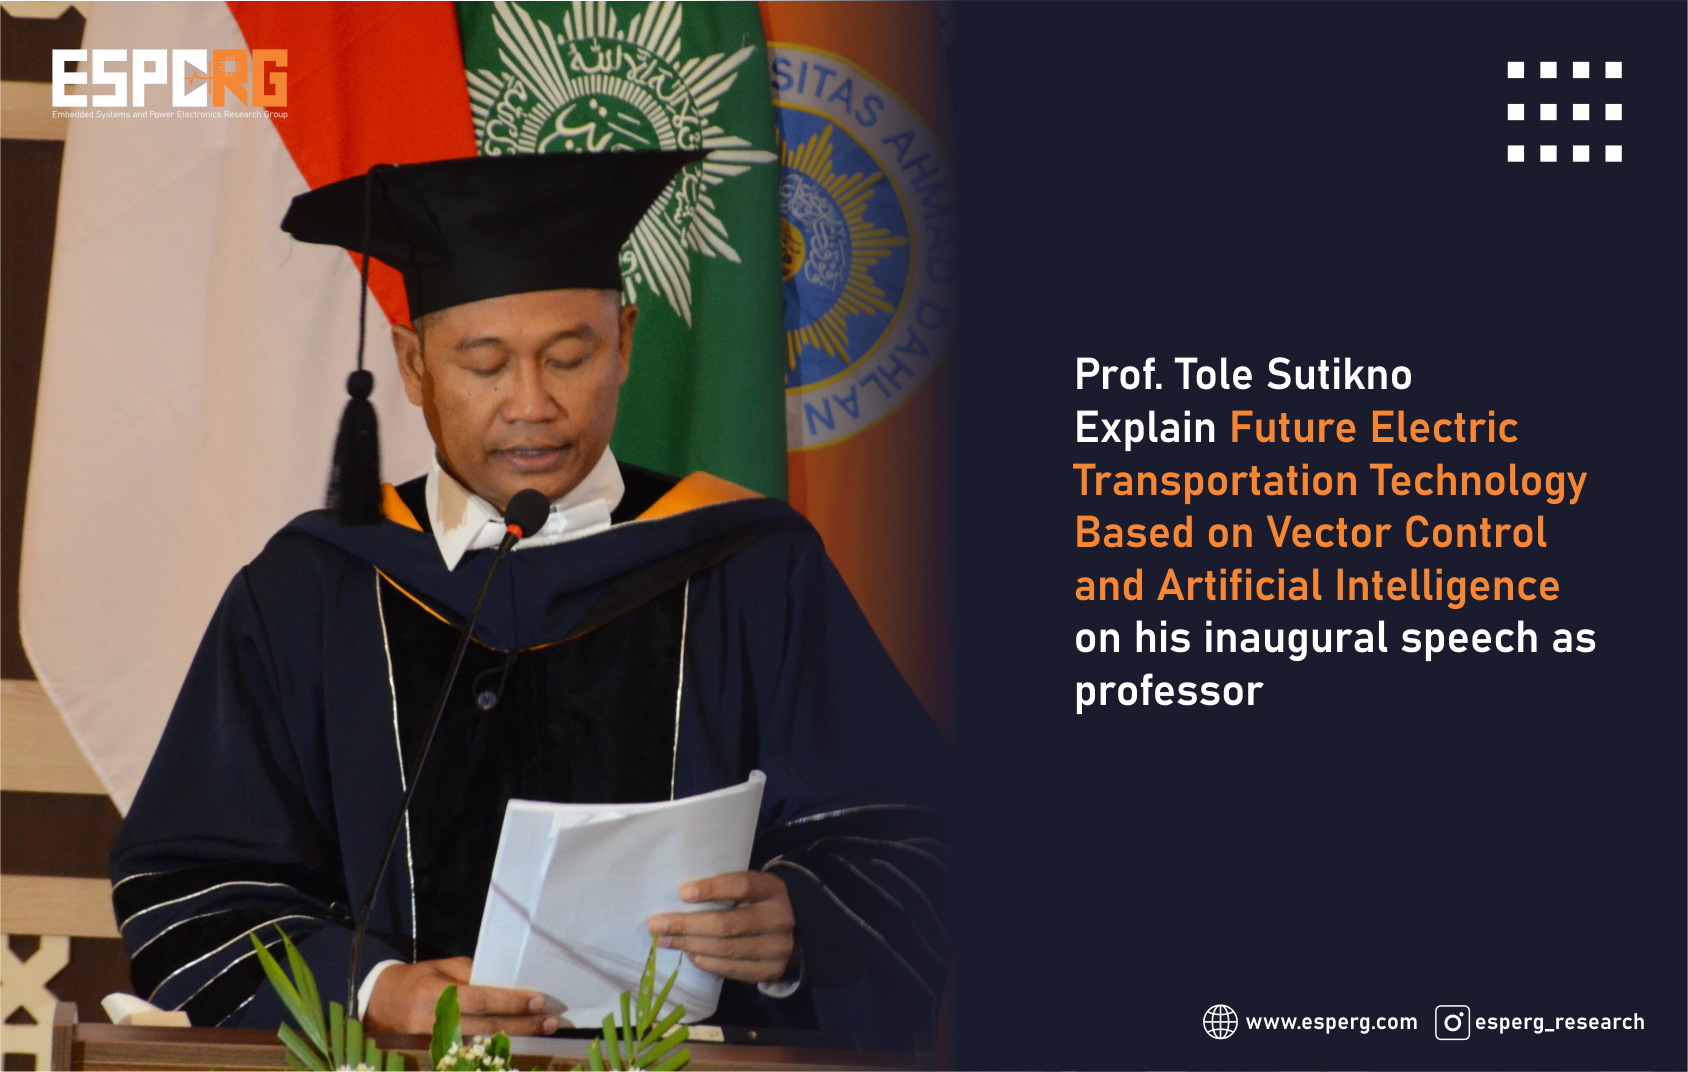 Prof. Tole Sutikno Explained Future Electric Transportation Technology Based on Vector Control and Artificial Intelligence on his inaugural speech as professor